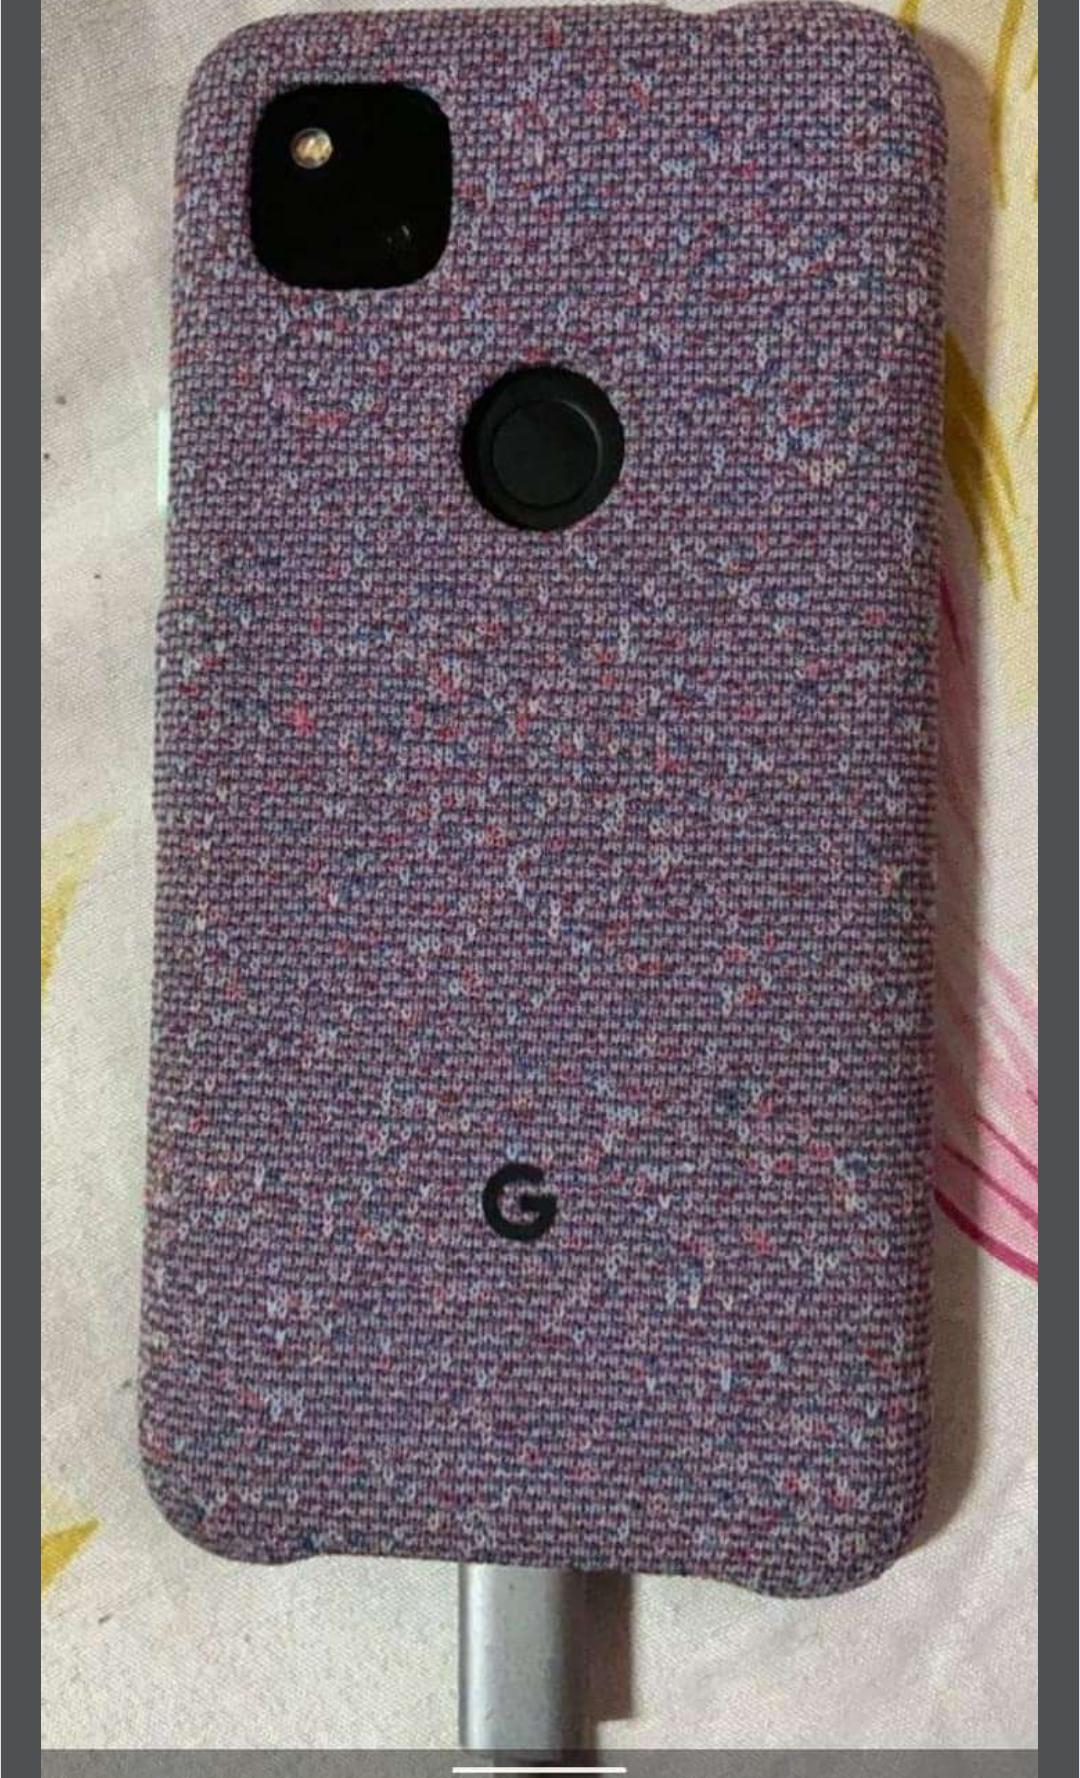 Google Pixel 4a leak showing fabric cover with Google logo